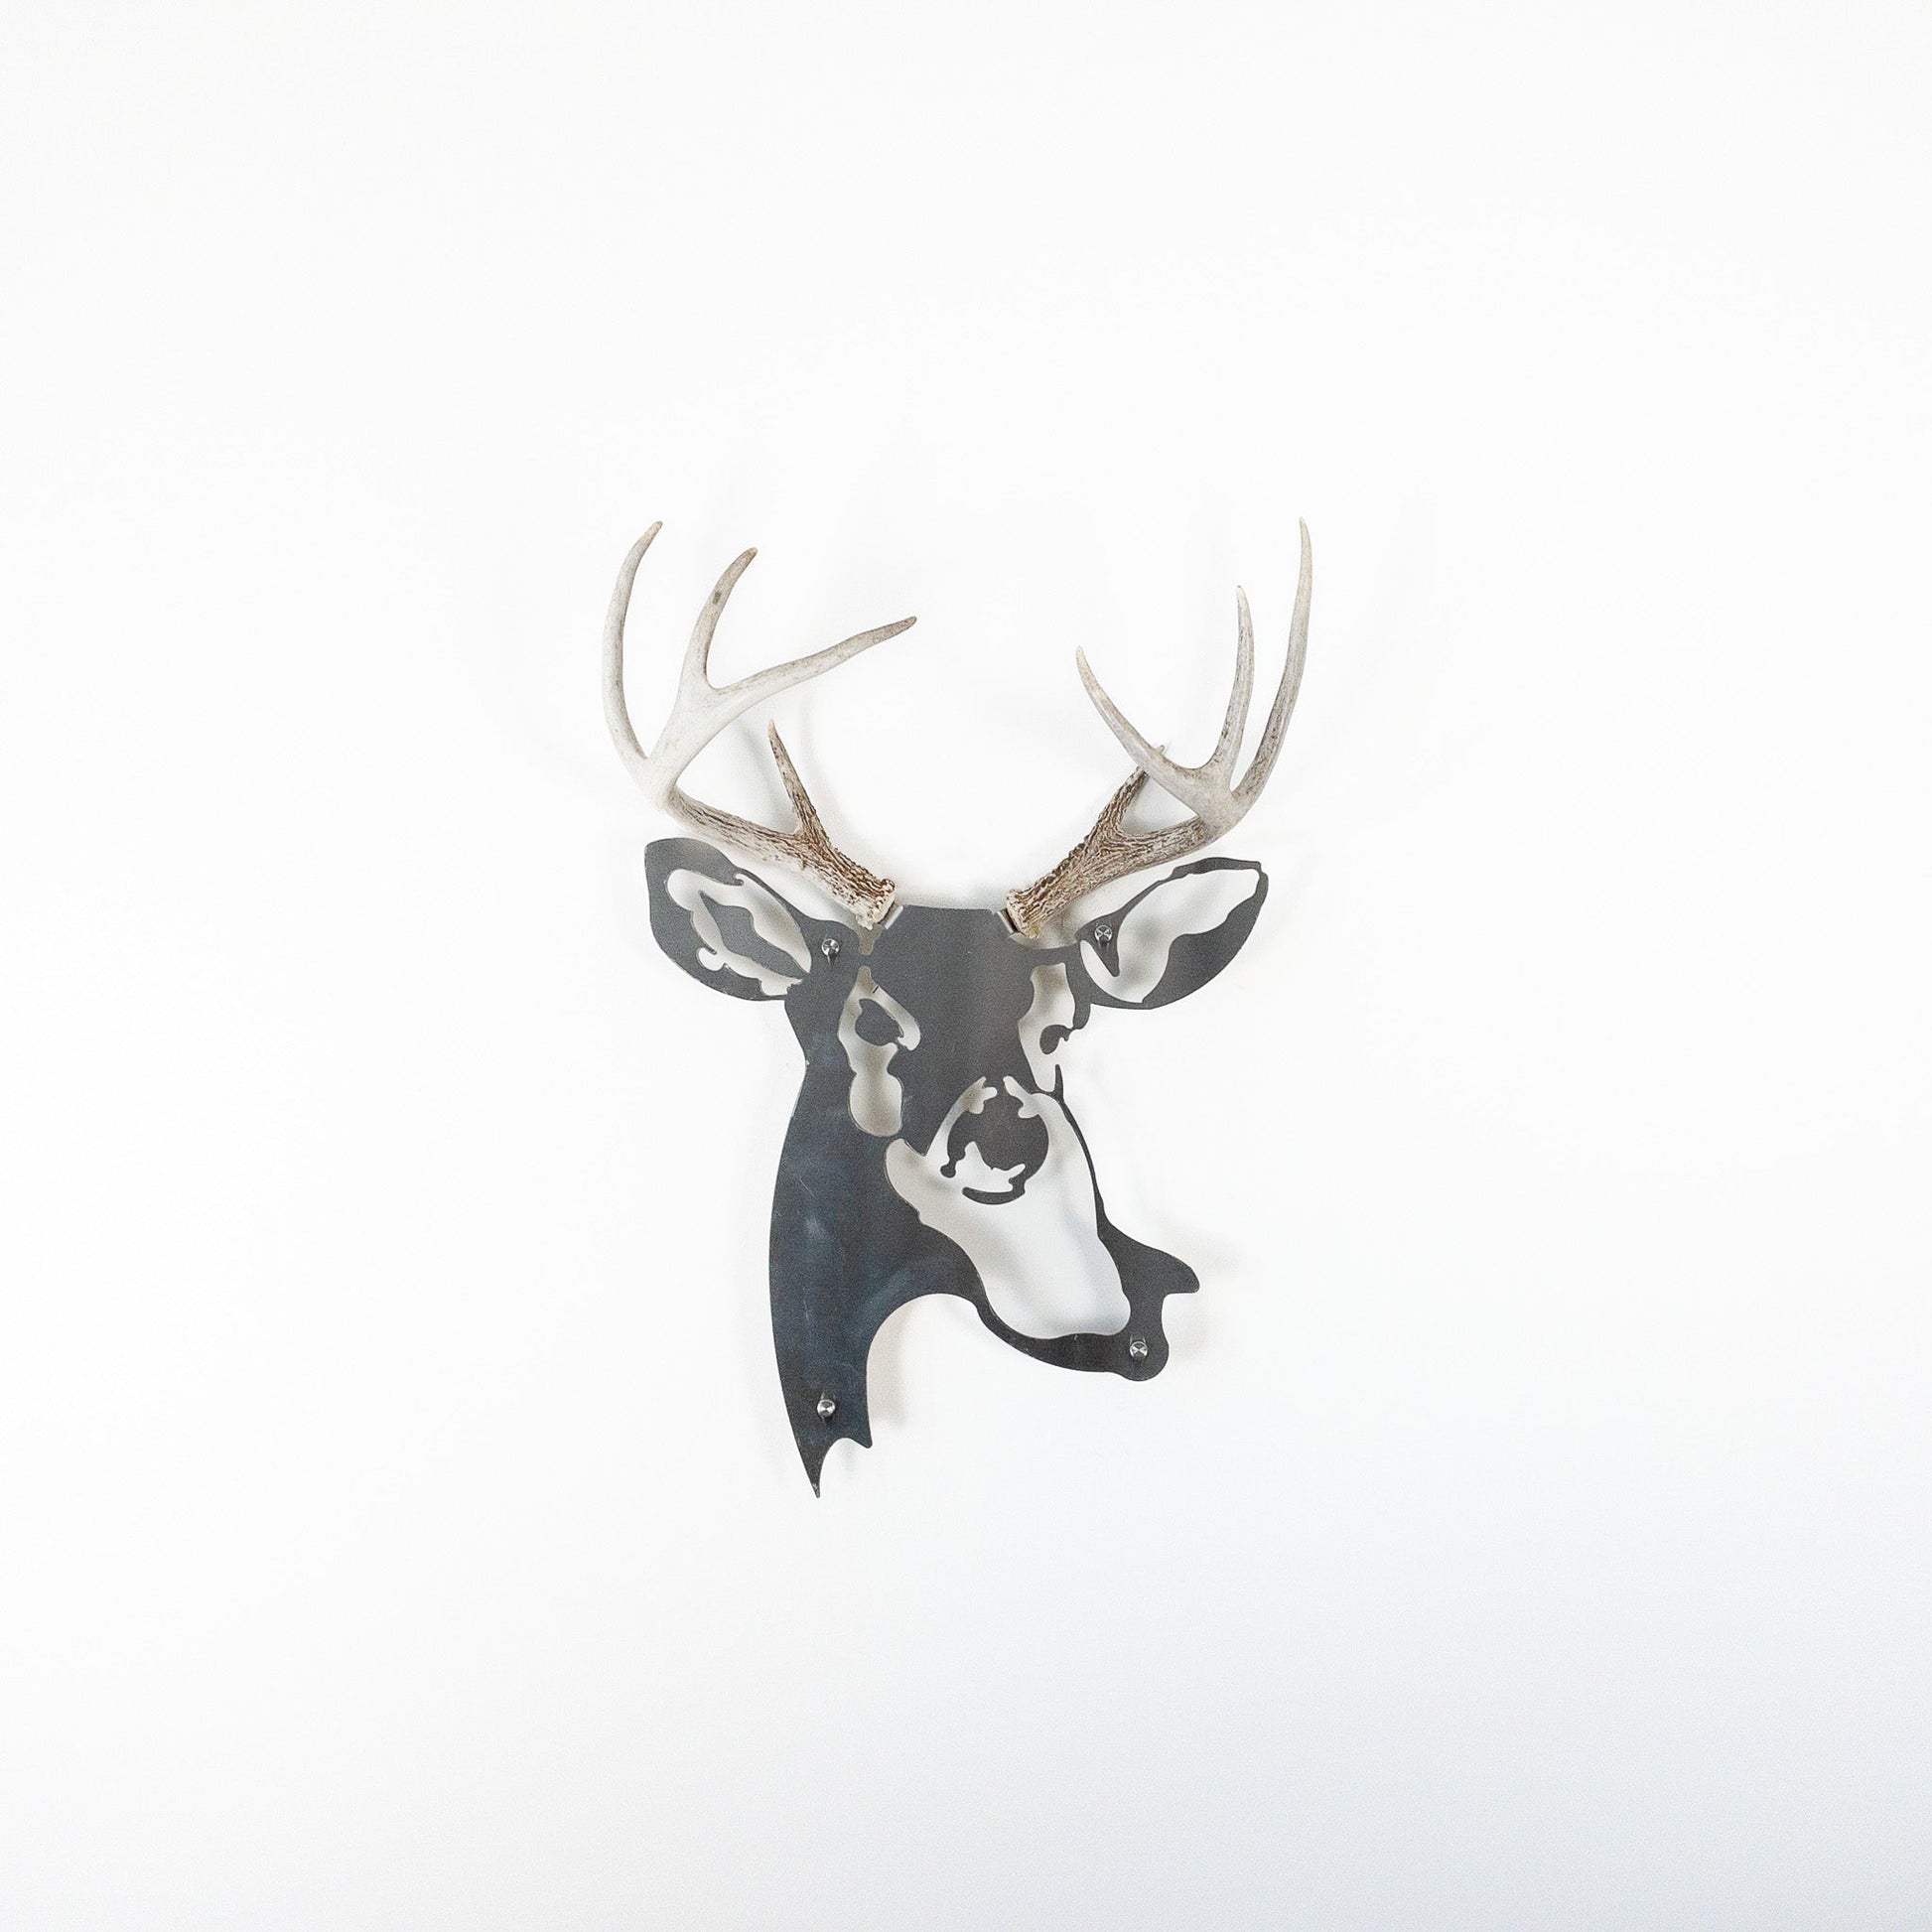 A metal wall decor made from real shed  White-Tailed Deer antlers mounted on a metal head